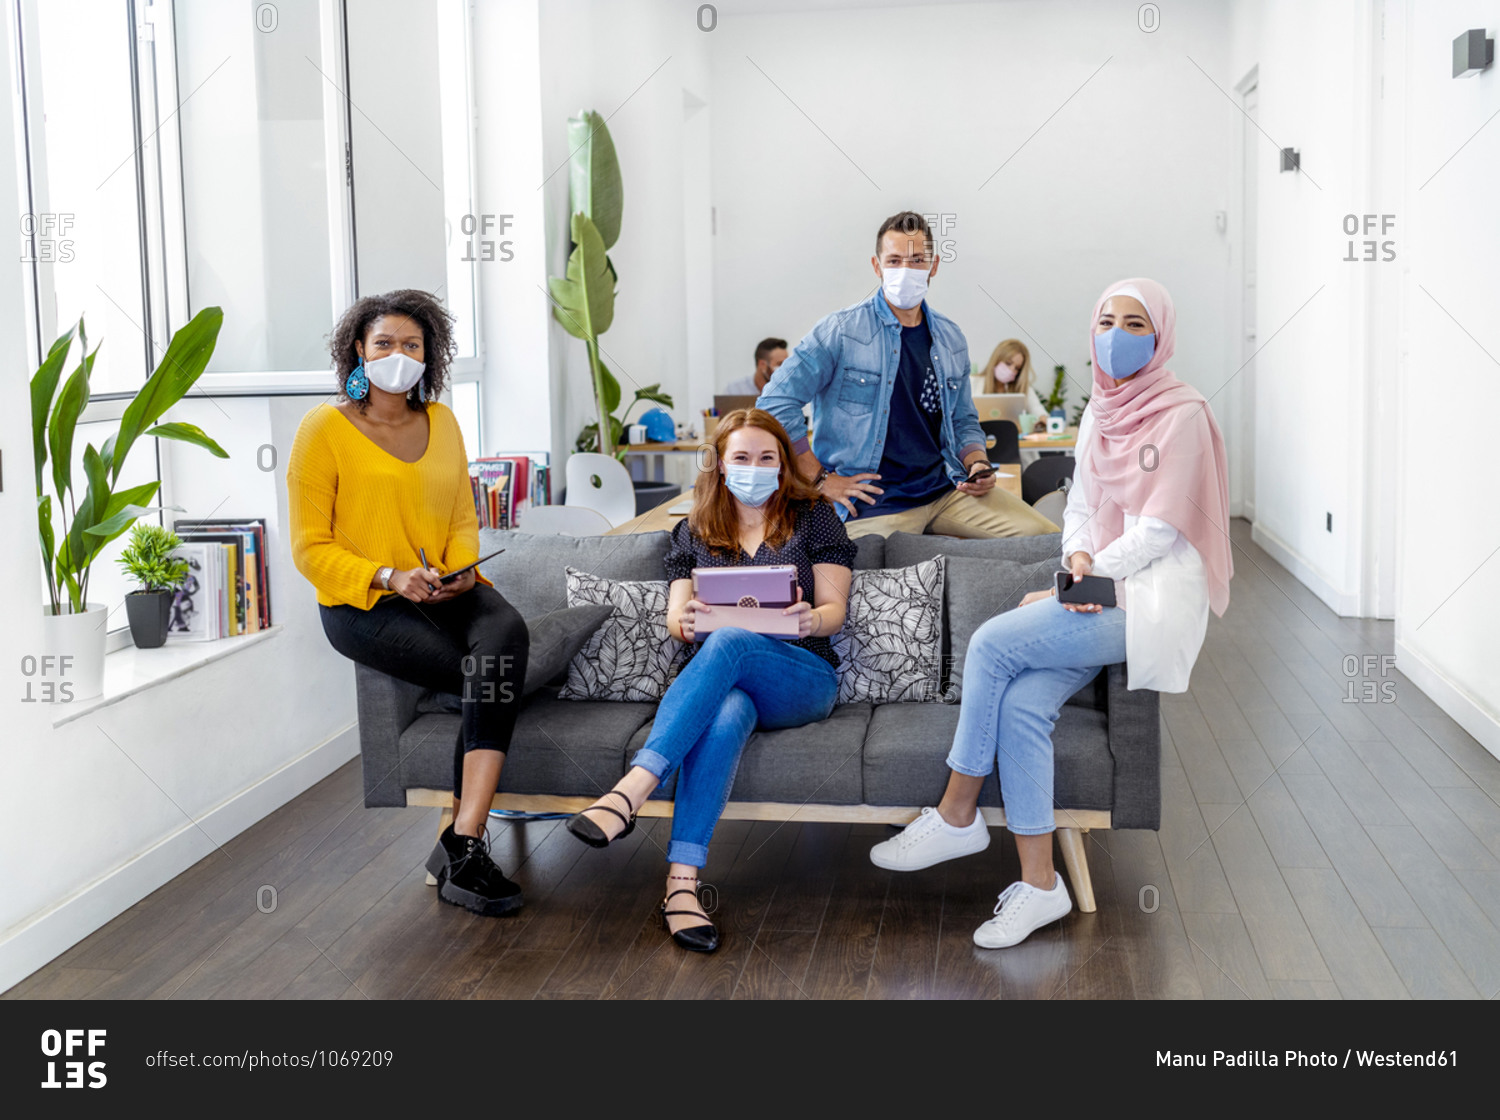 Employees wearing face mask maintaining social distance while sitting with coworker in background at office during COVID-19